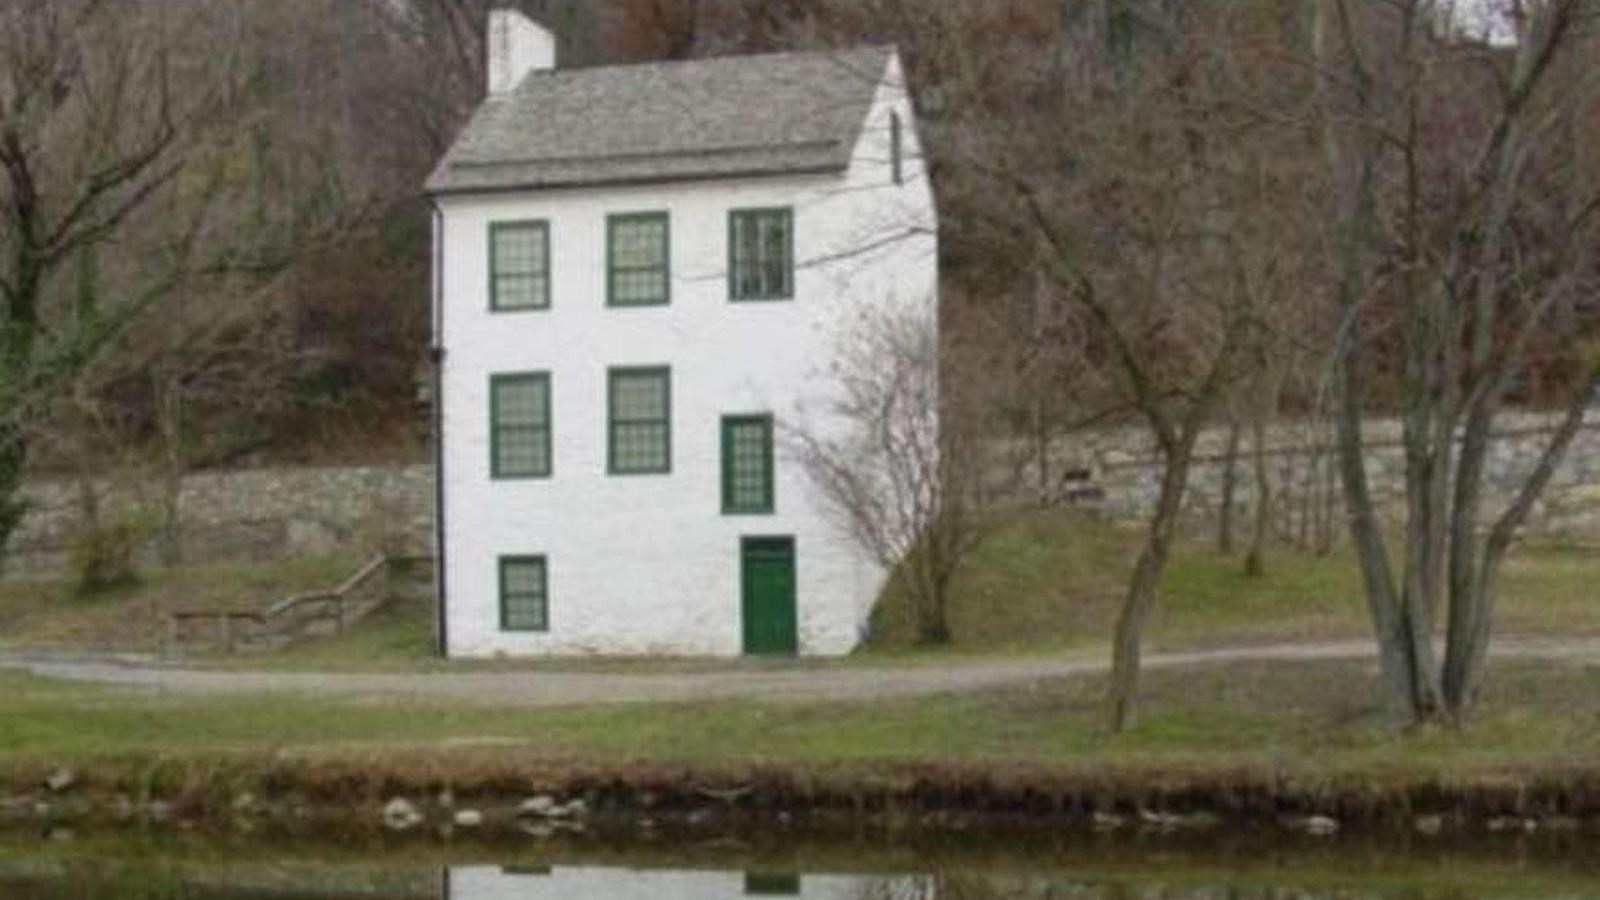 The Abner cloud House stands on the edge of the C & O Canal